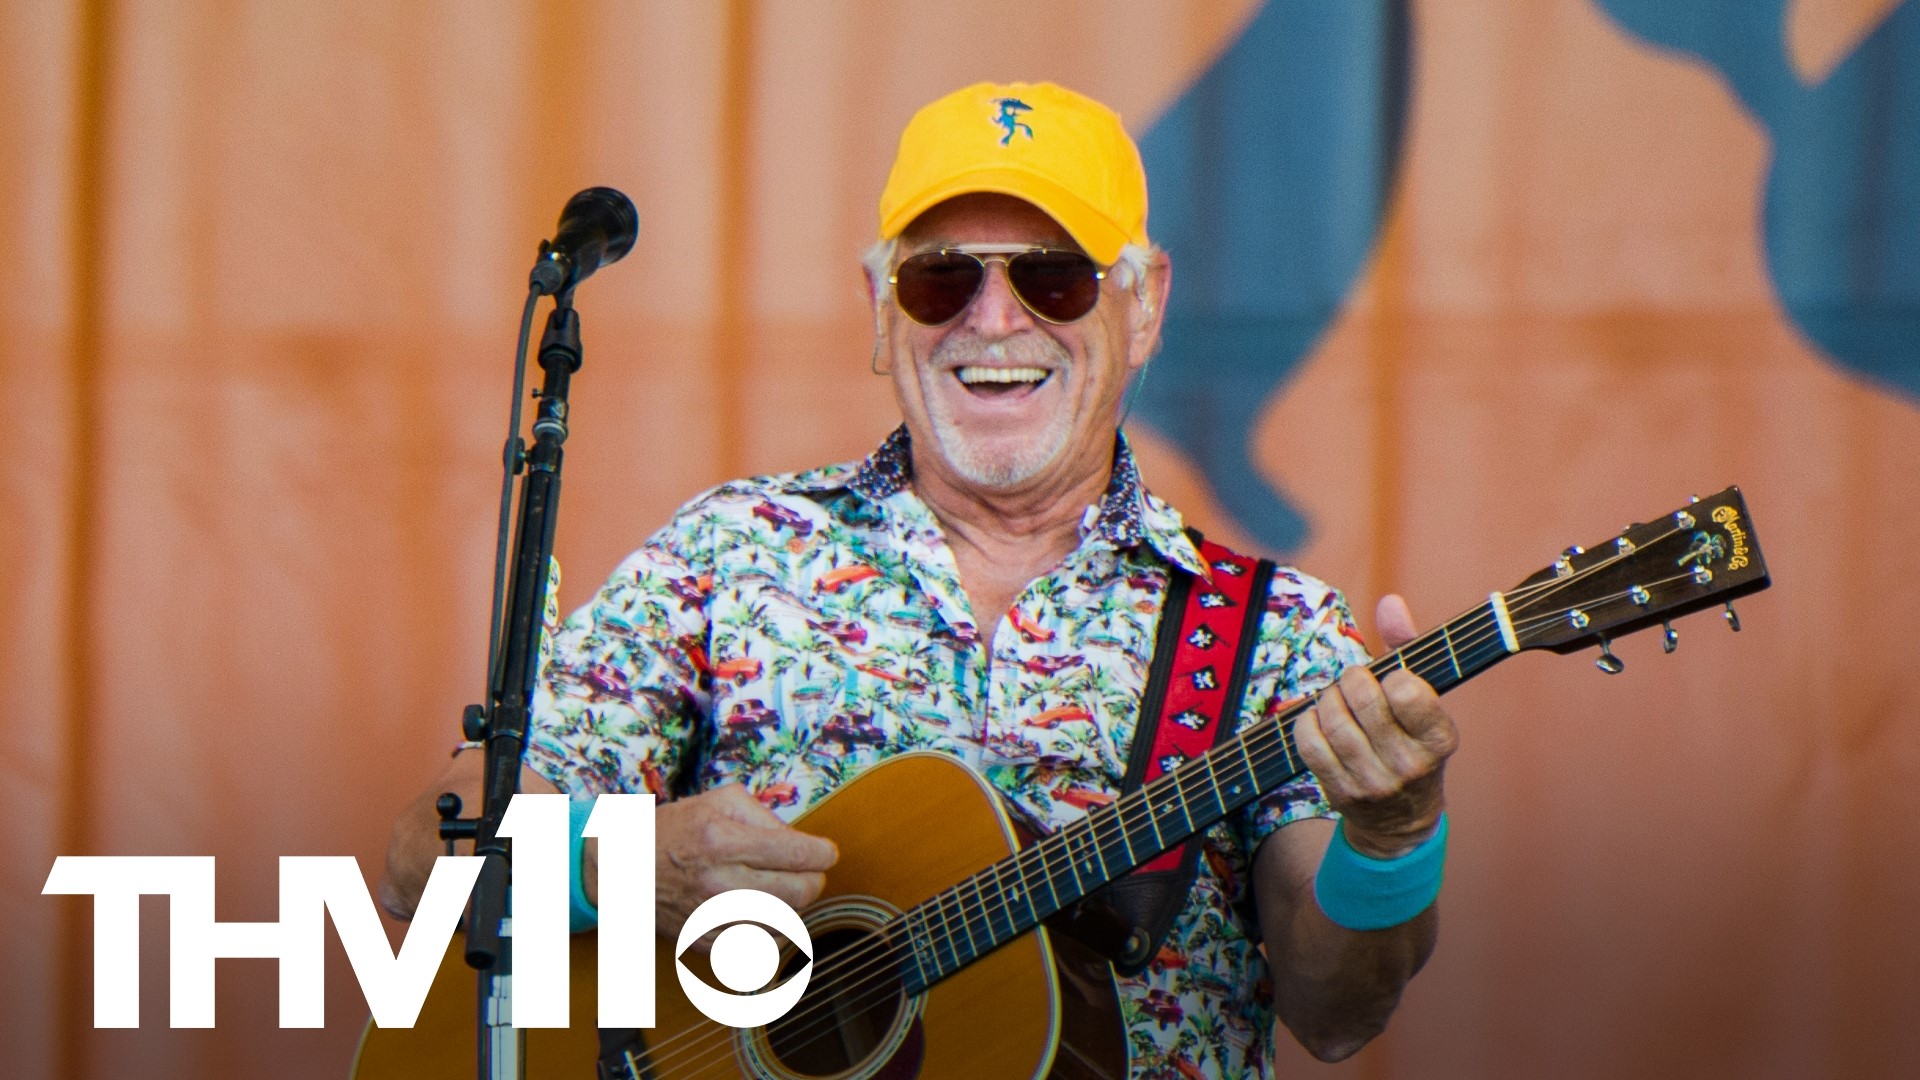 The song “Margaritaville” became a seaside standard and inspired generations of fans – known as Parrotheads – to celebrate easy living.